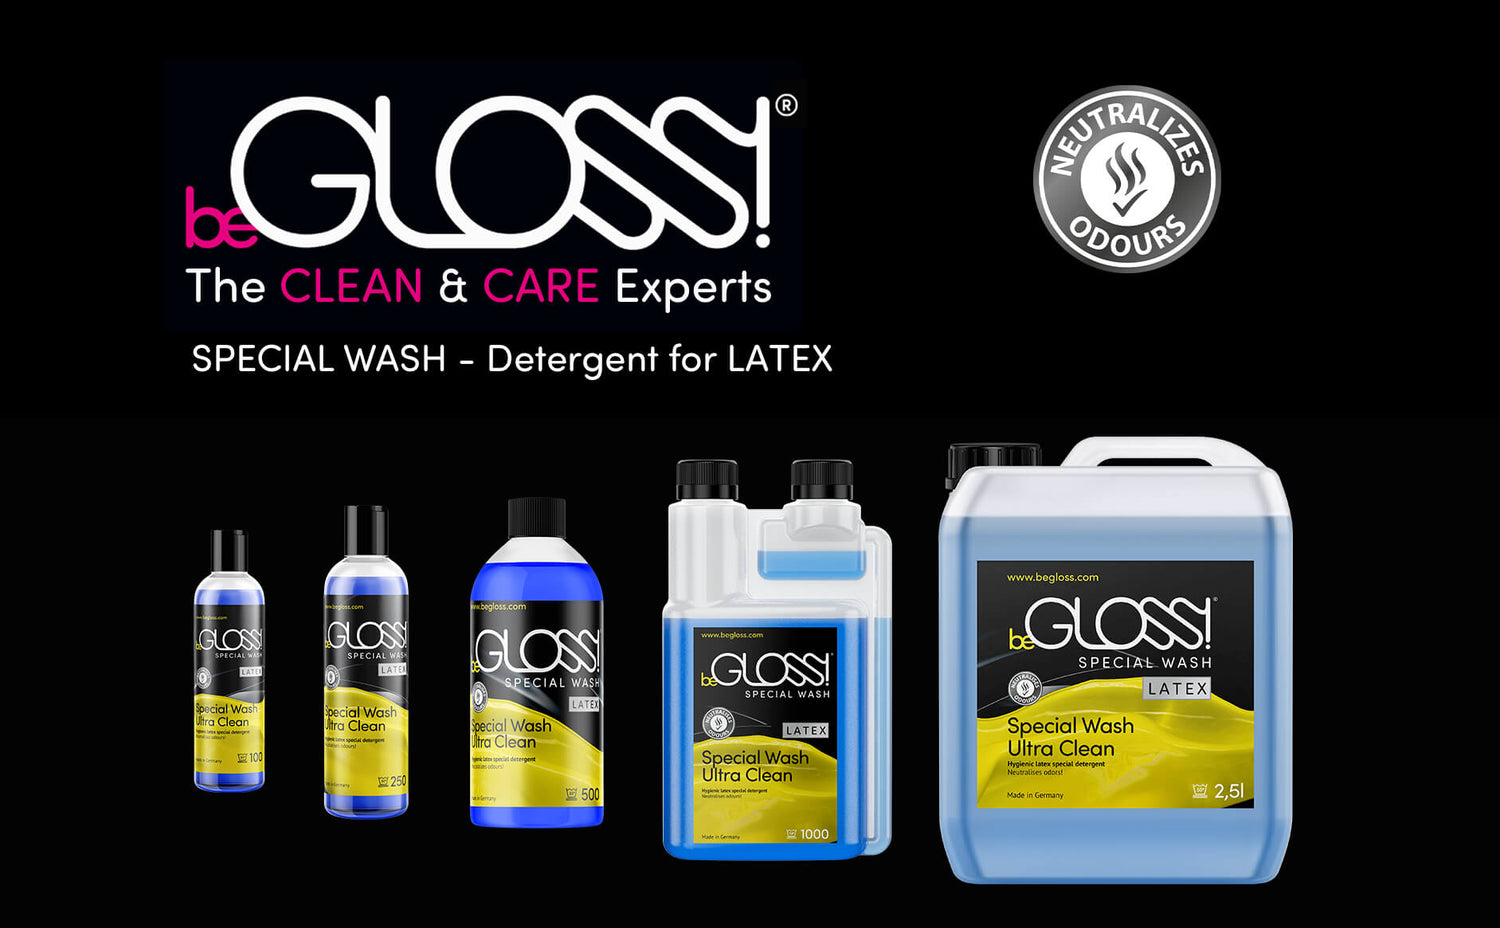 beGLOSS Special Wash